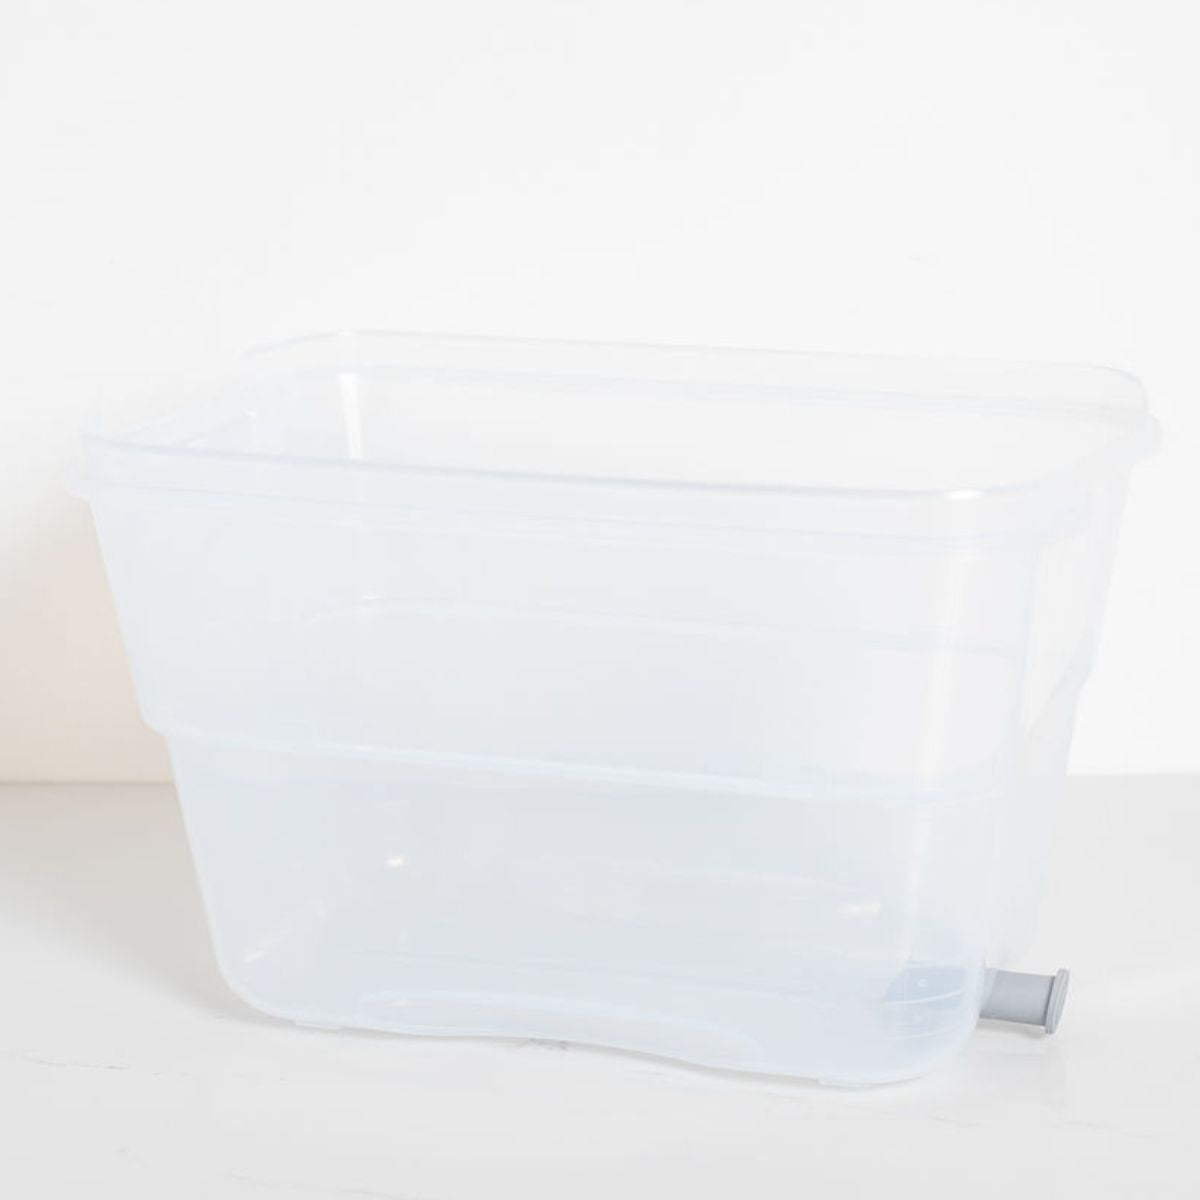 Spare Outer Container - Strucket, color_Grey